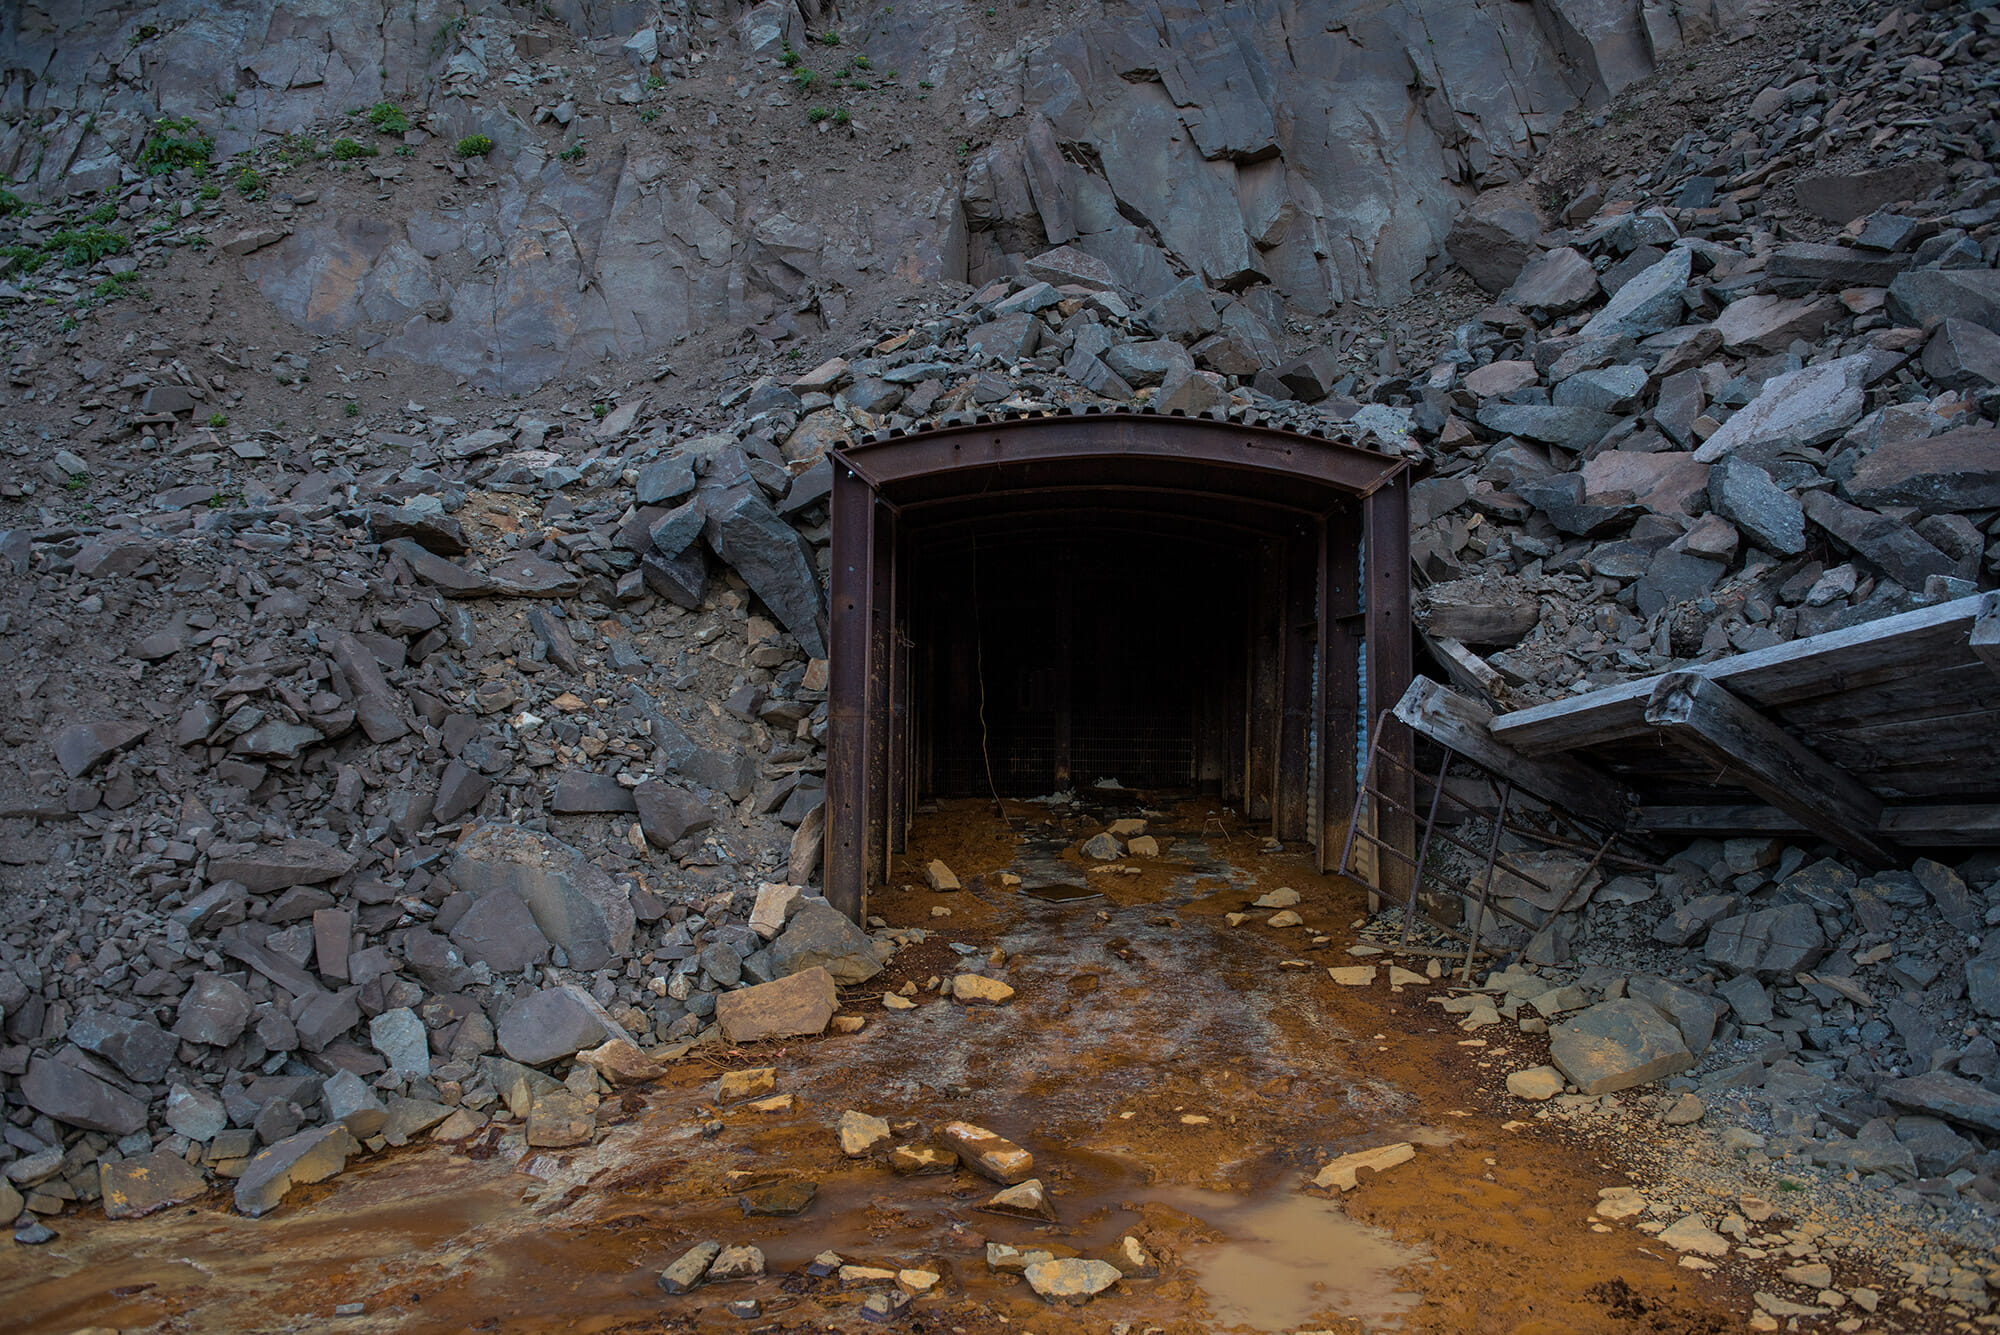 Discolored water coming out of a mine opening